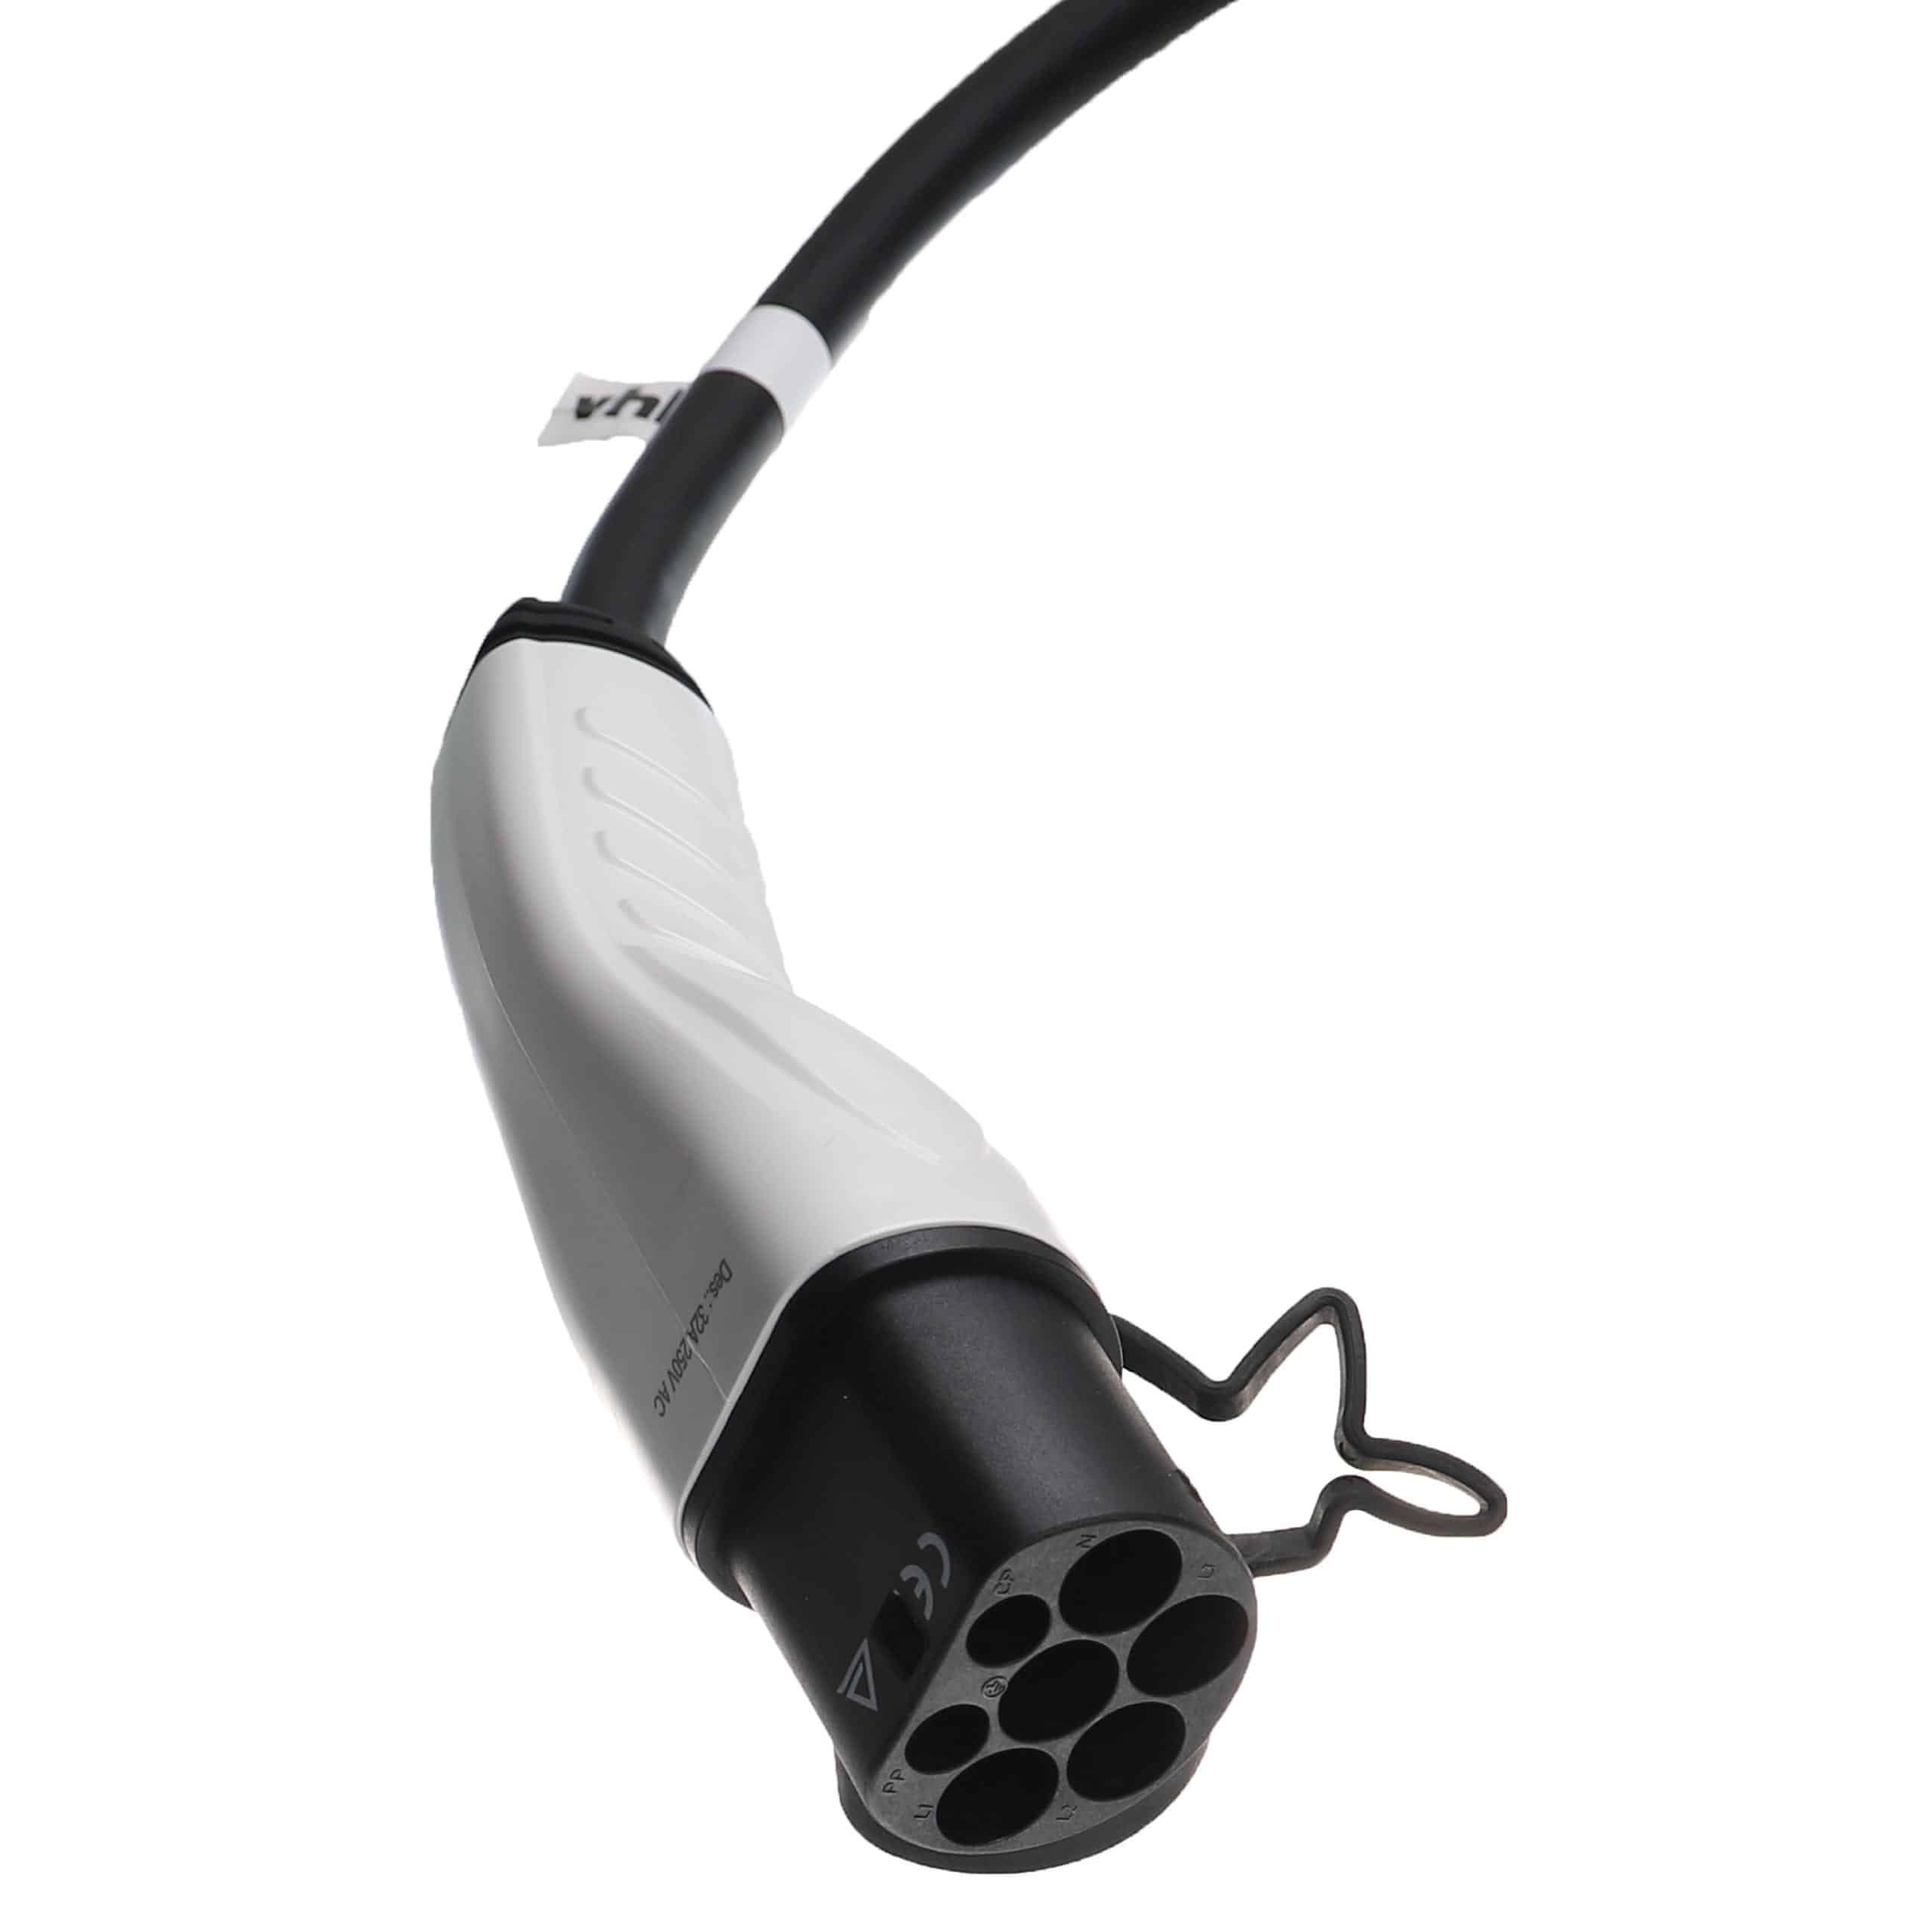 Charging Cable for Electric Car, Plug-In Hybrid - Type 2 to Type 2 Cable, Single-Phase, 32 A, 7 kW, 7 m